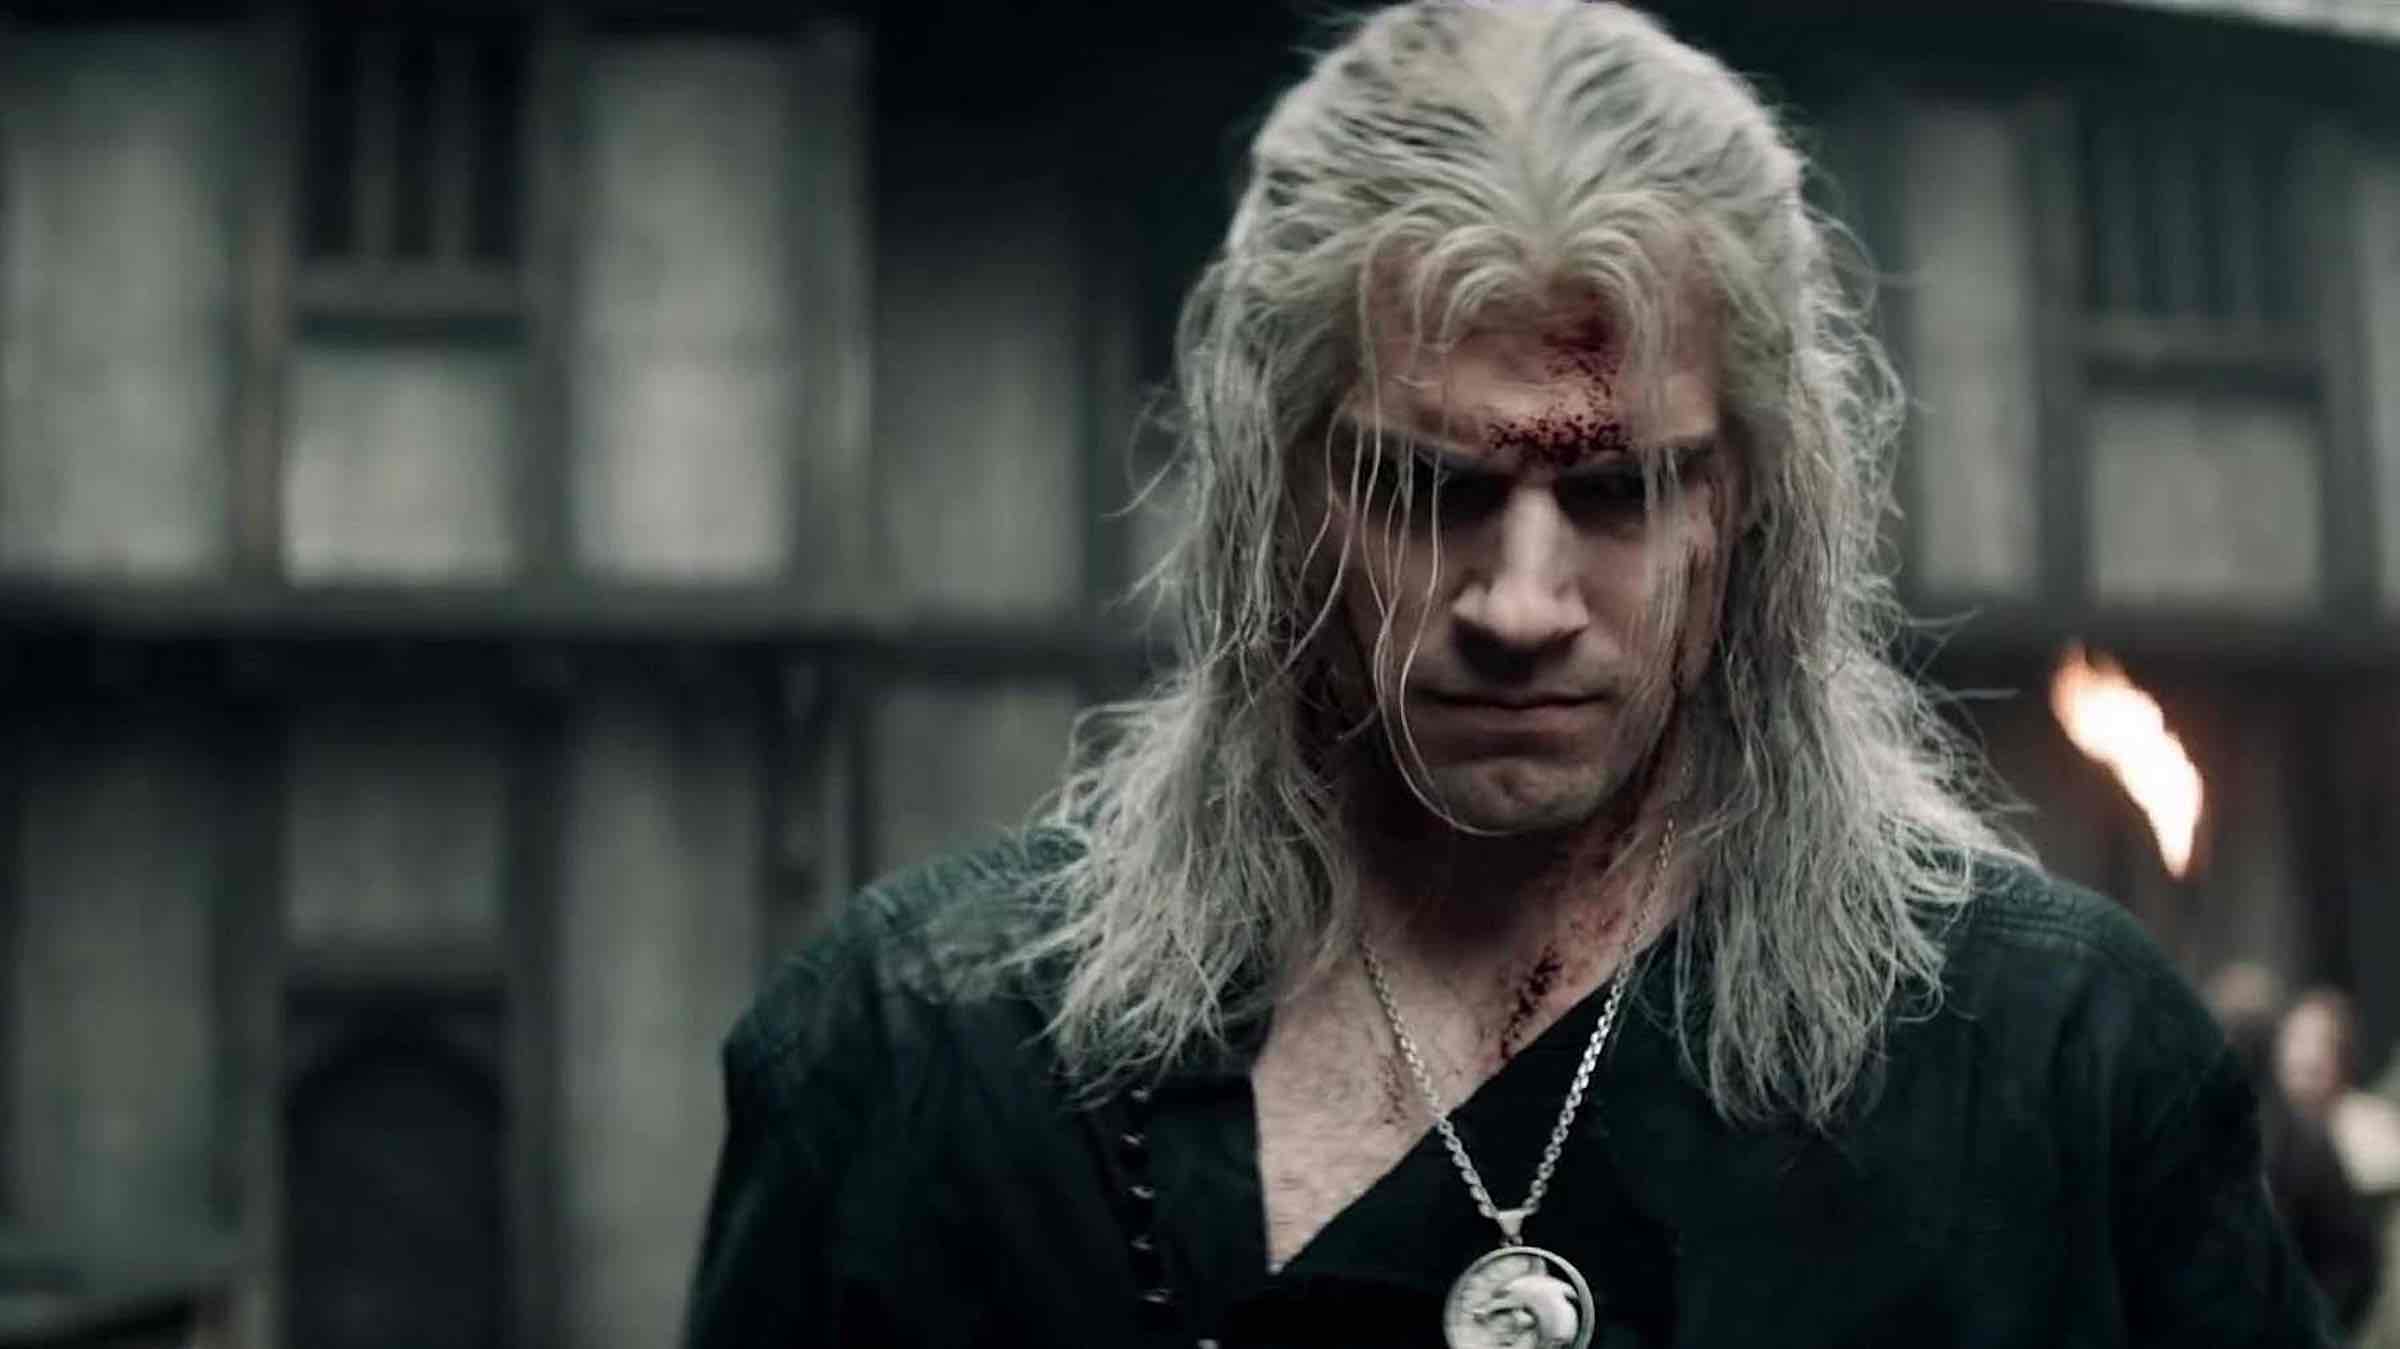 We’ve gathered some of the most common feedback for 'The Witcher' after its pilot fan screening, to give you an idea of what to expect on December 20th.